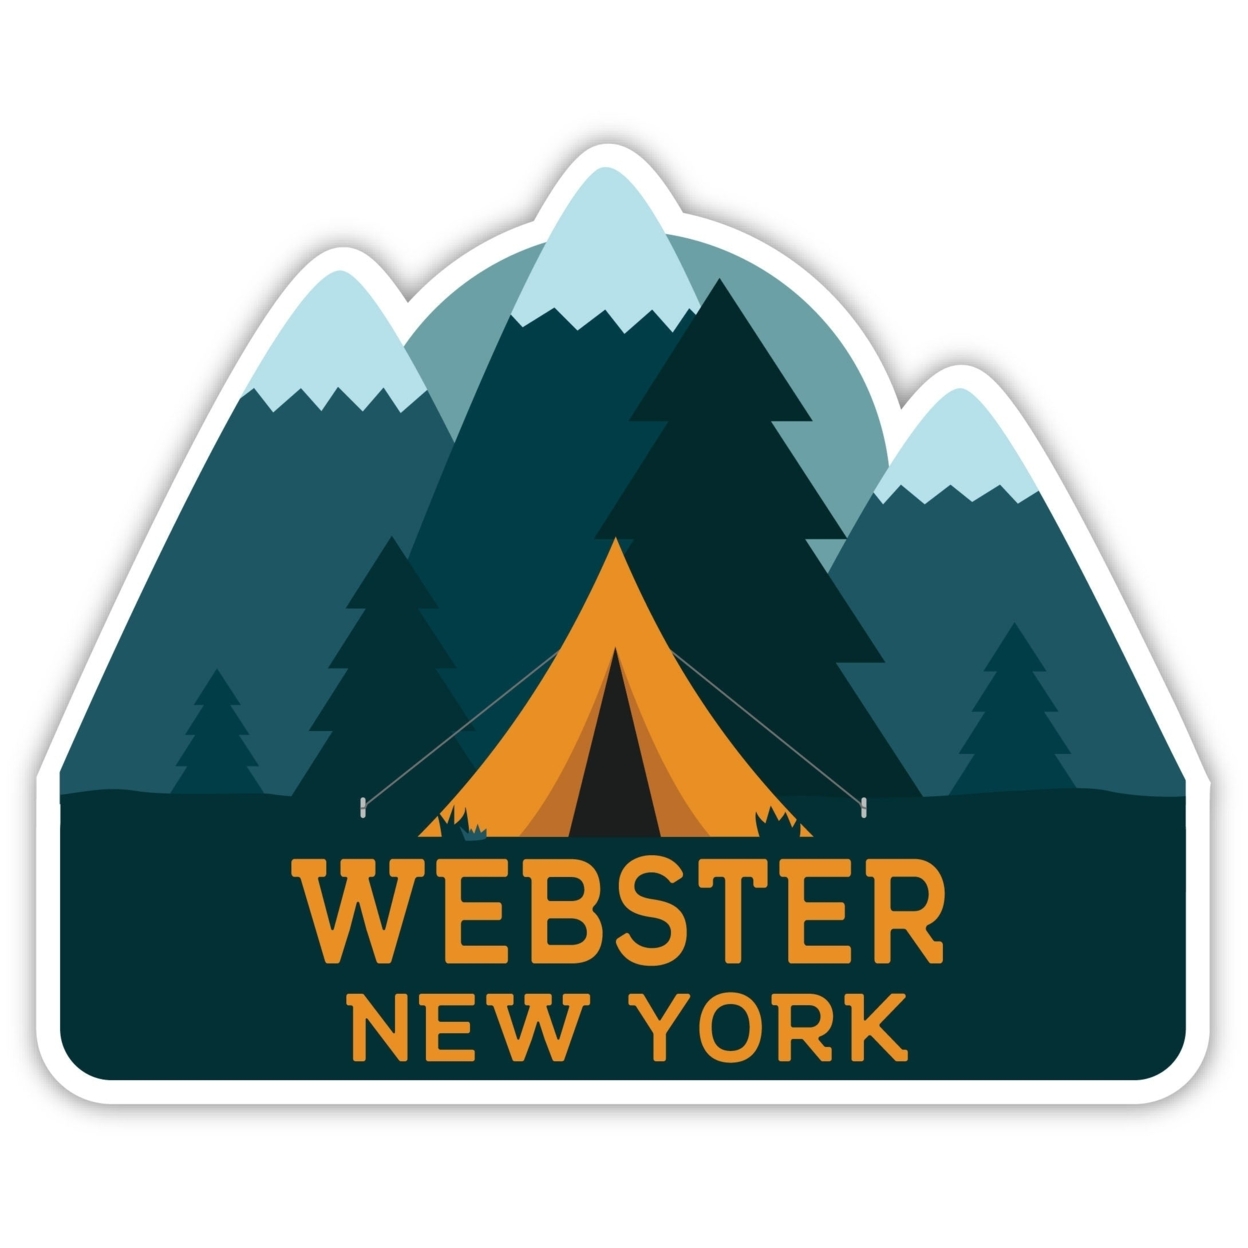 Webster New York Souvenir Decorative Stickers (Choose Theme And Size) - Single Unit, 2-Inch, Adventures Awaits